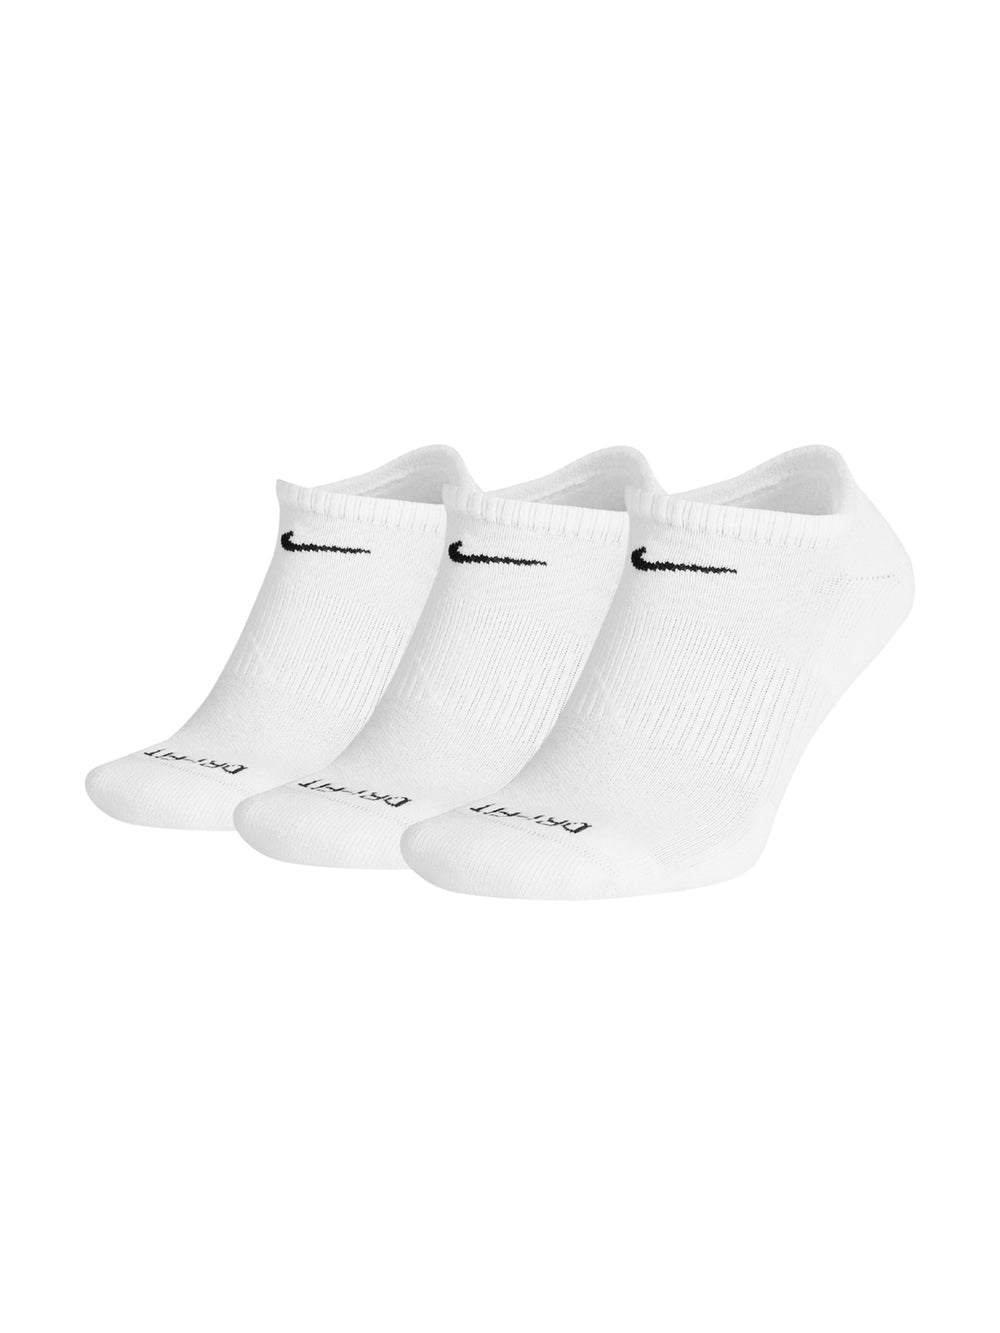 NIKE EVERYDAY CUSHIONED NO SHOW DRI FIT 3 PACKS